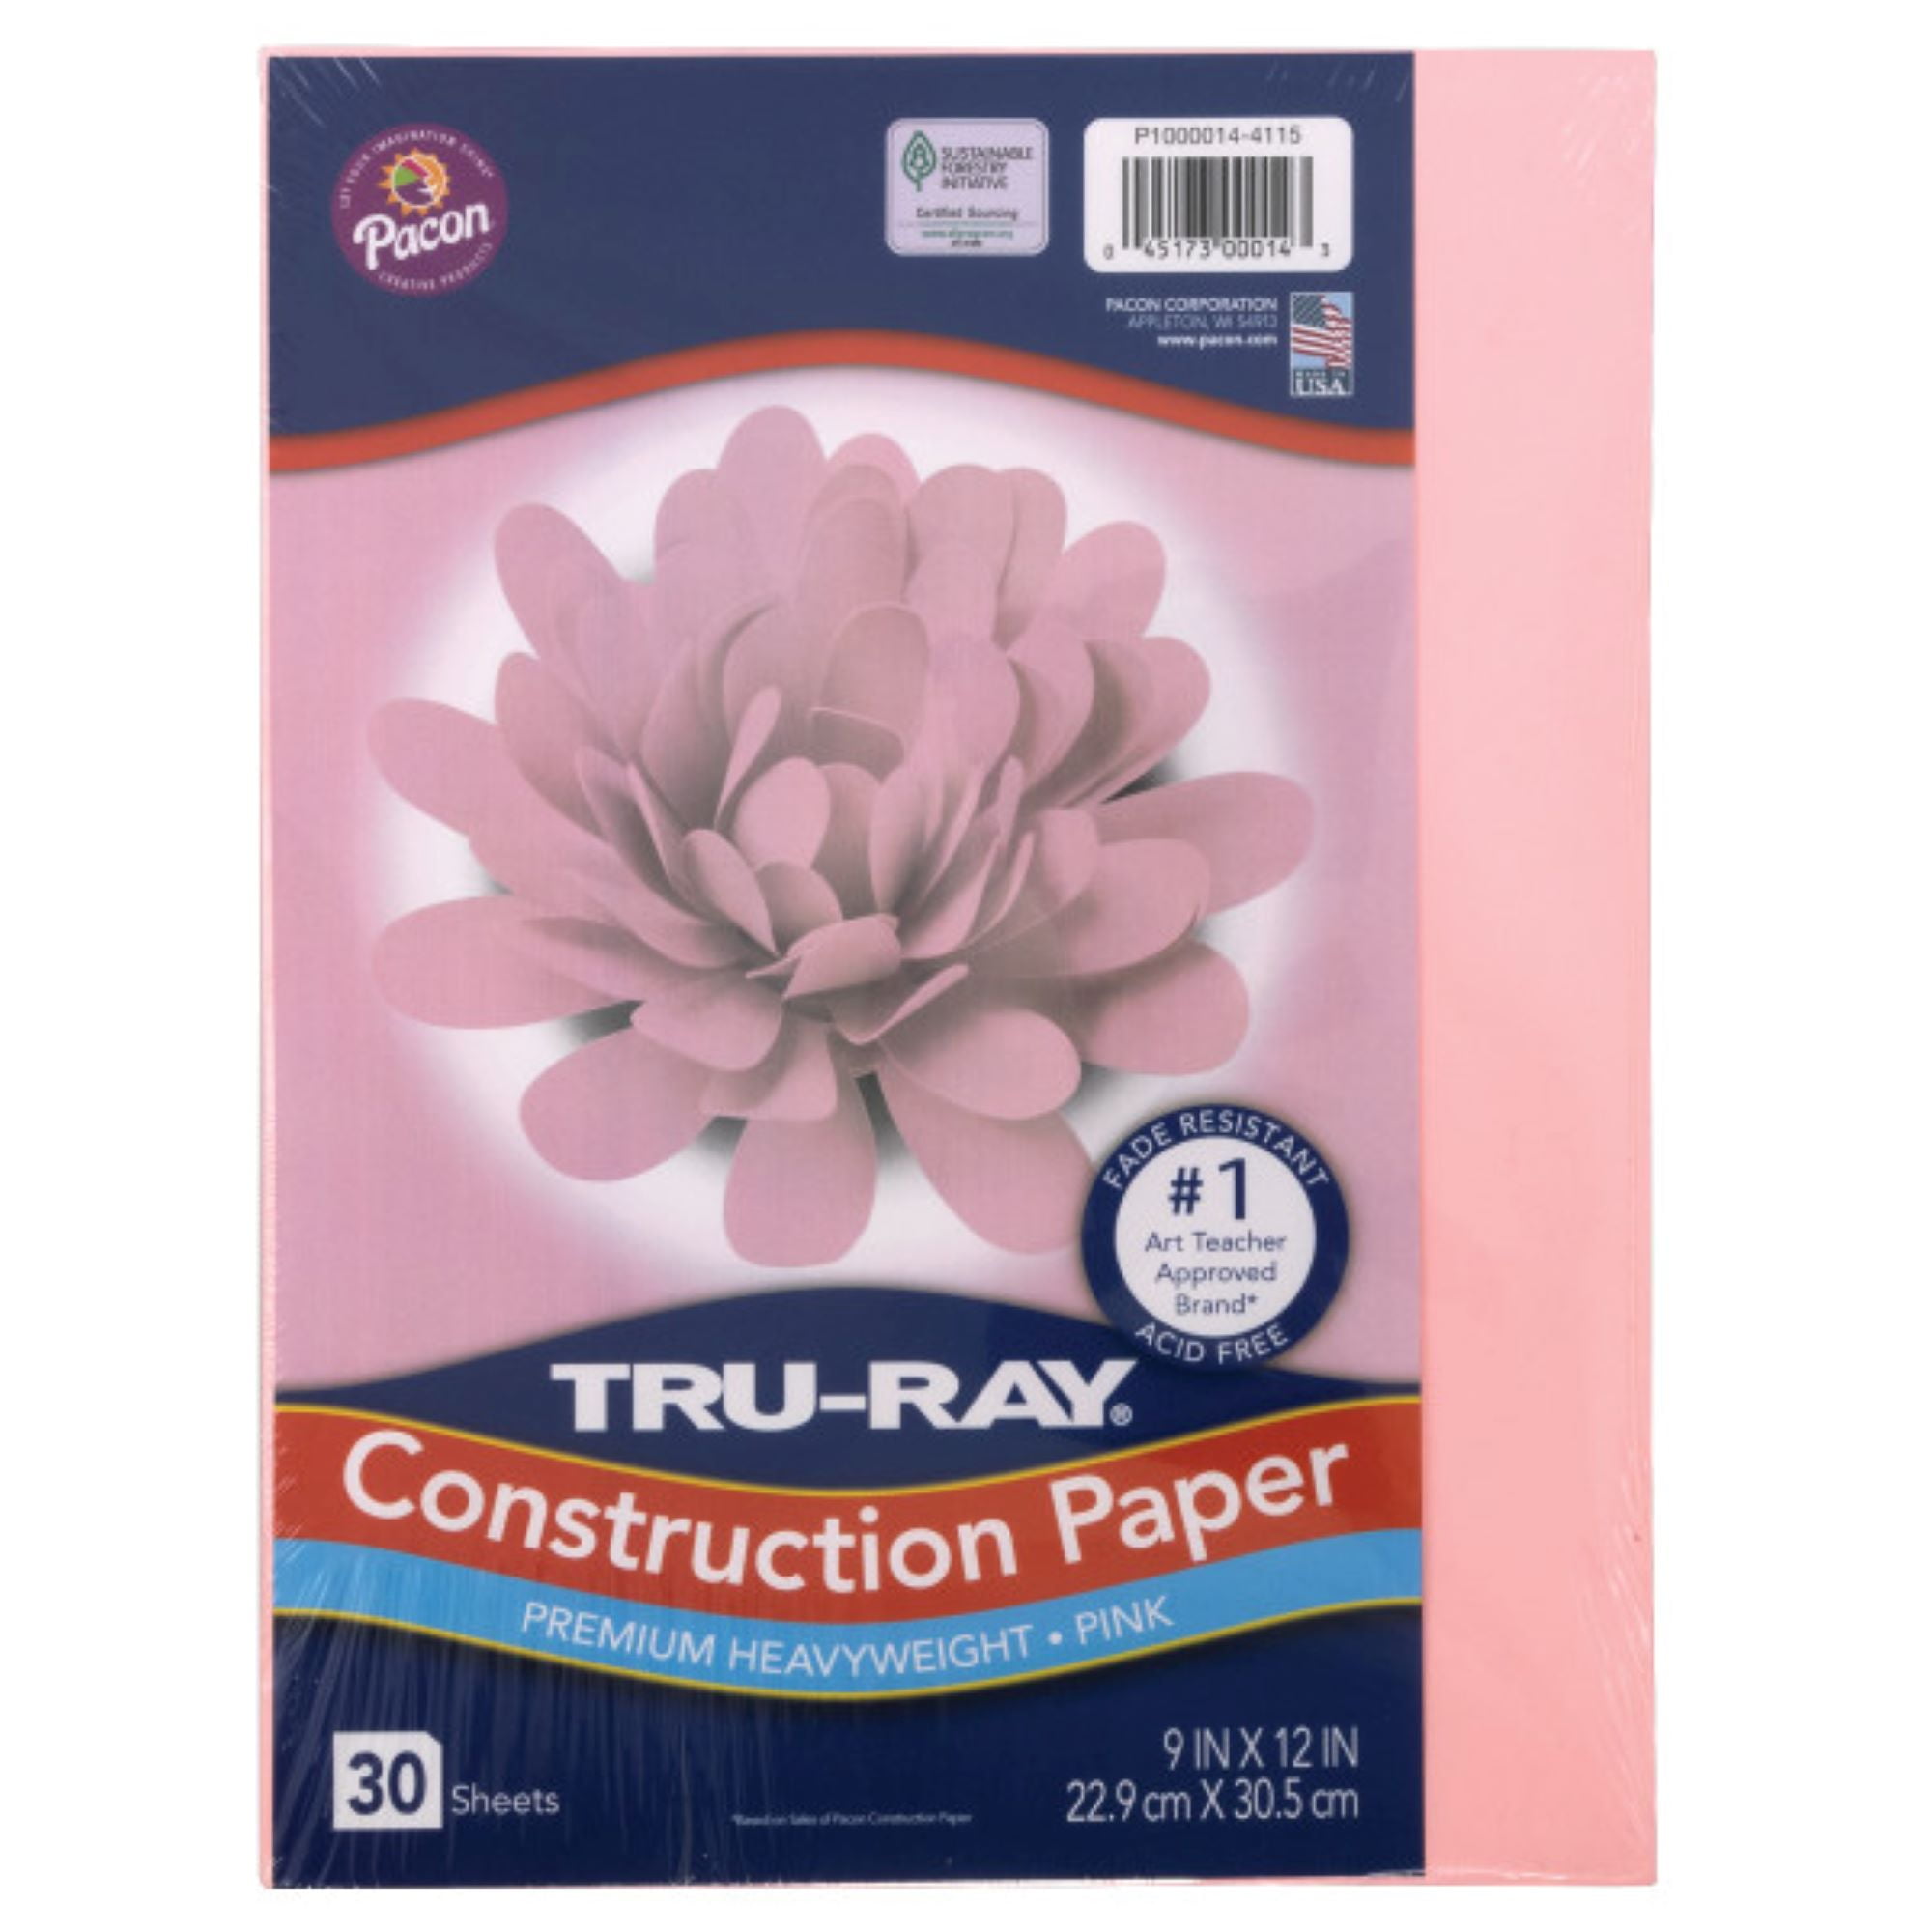 TRU-RAY® CONSTRUCTION PAPER 9 X 12 GOLD COLOR, 50 SHEETS - Multi access  office